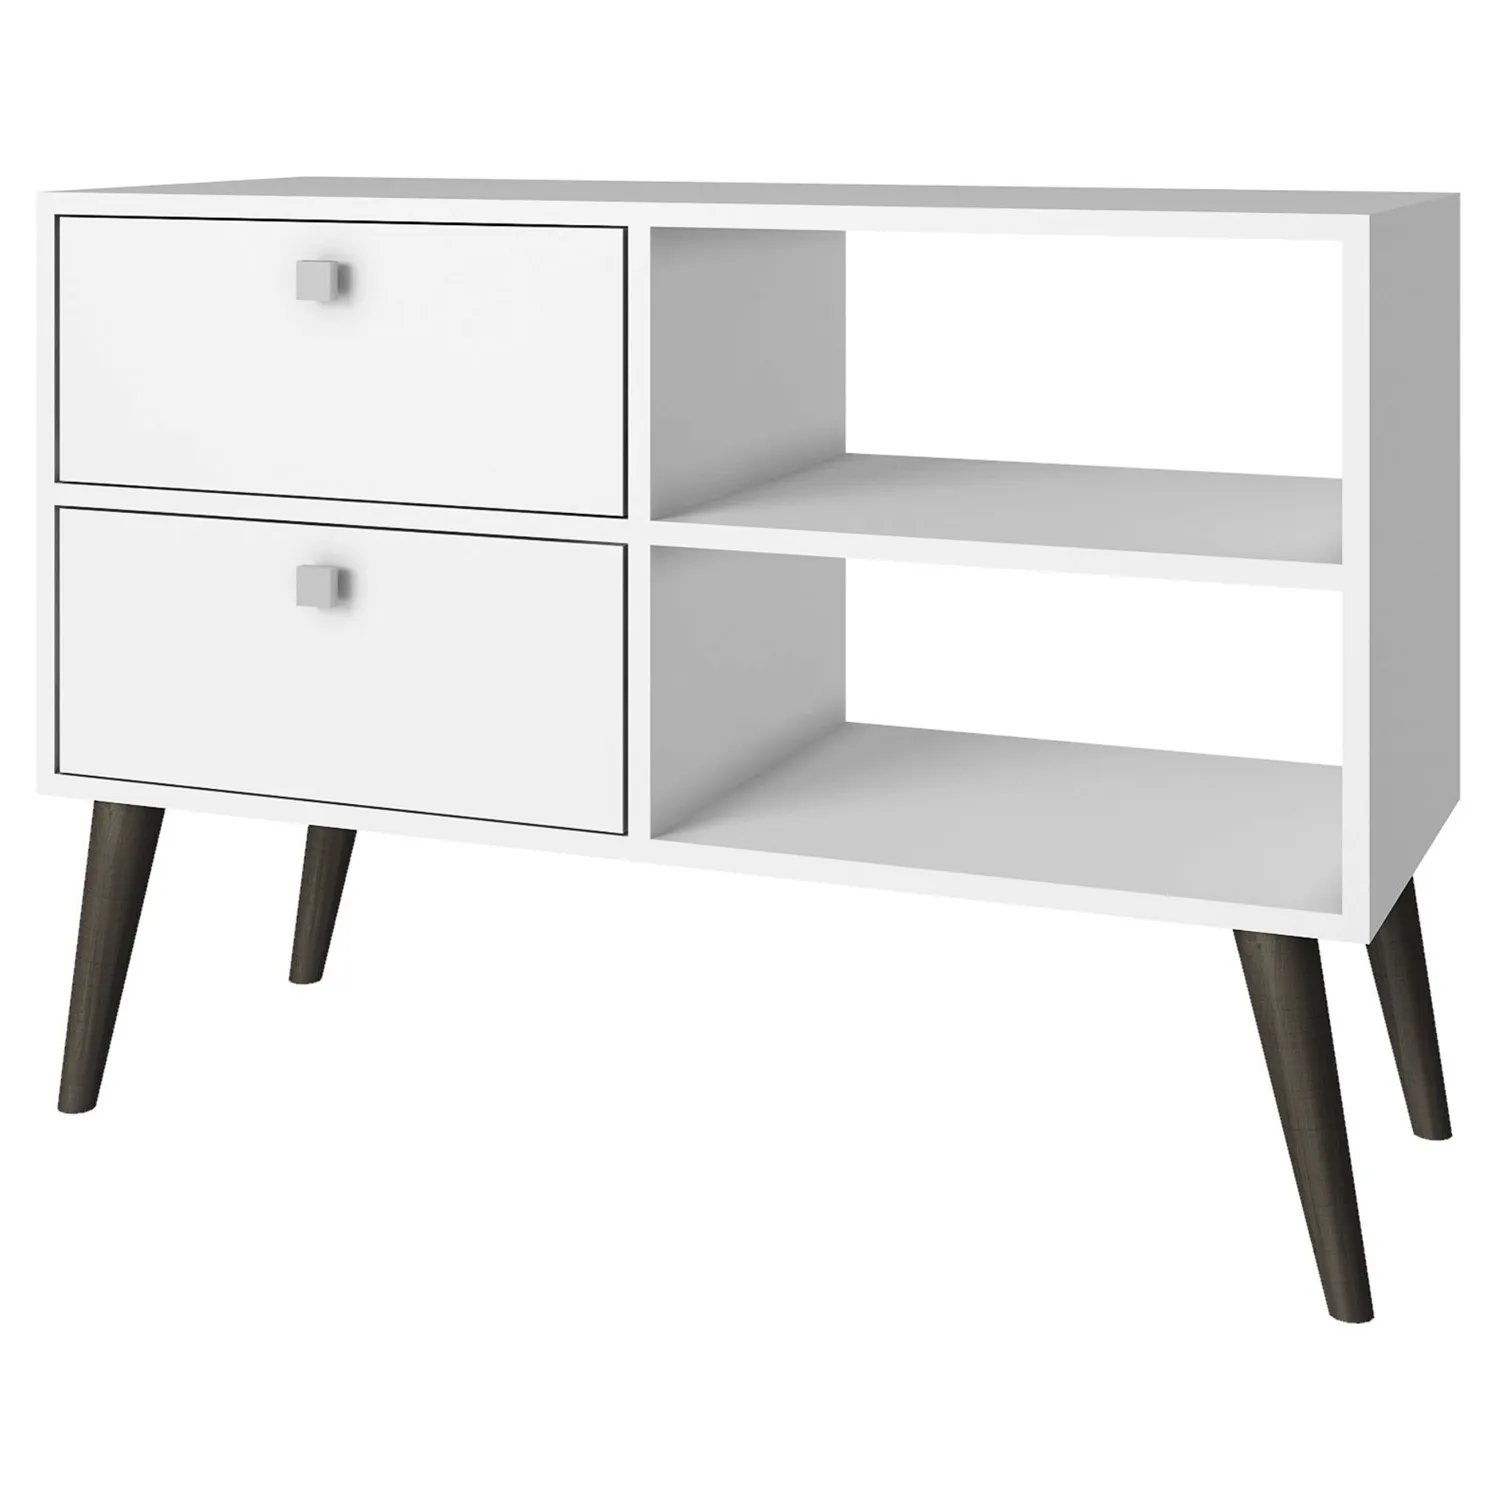 QuikFurn White Grey Wood Modern Classic Mid-Century Style TV Stand Entertainment Center